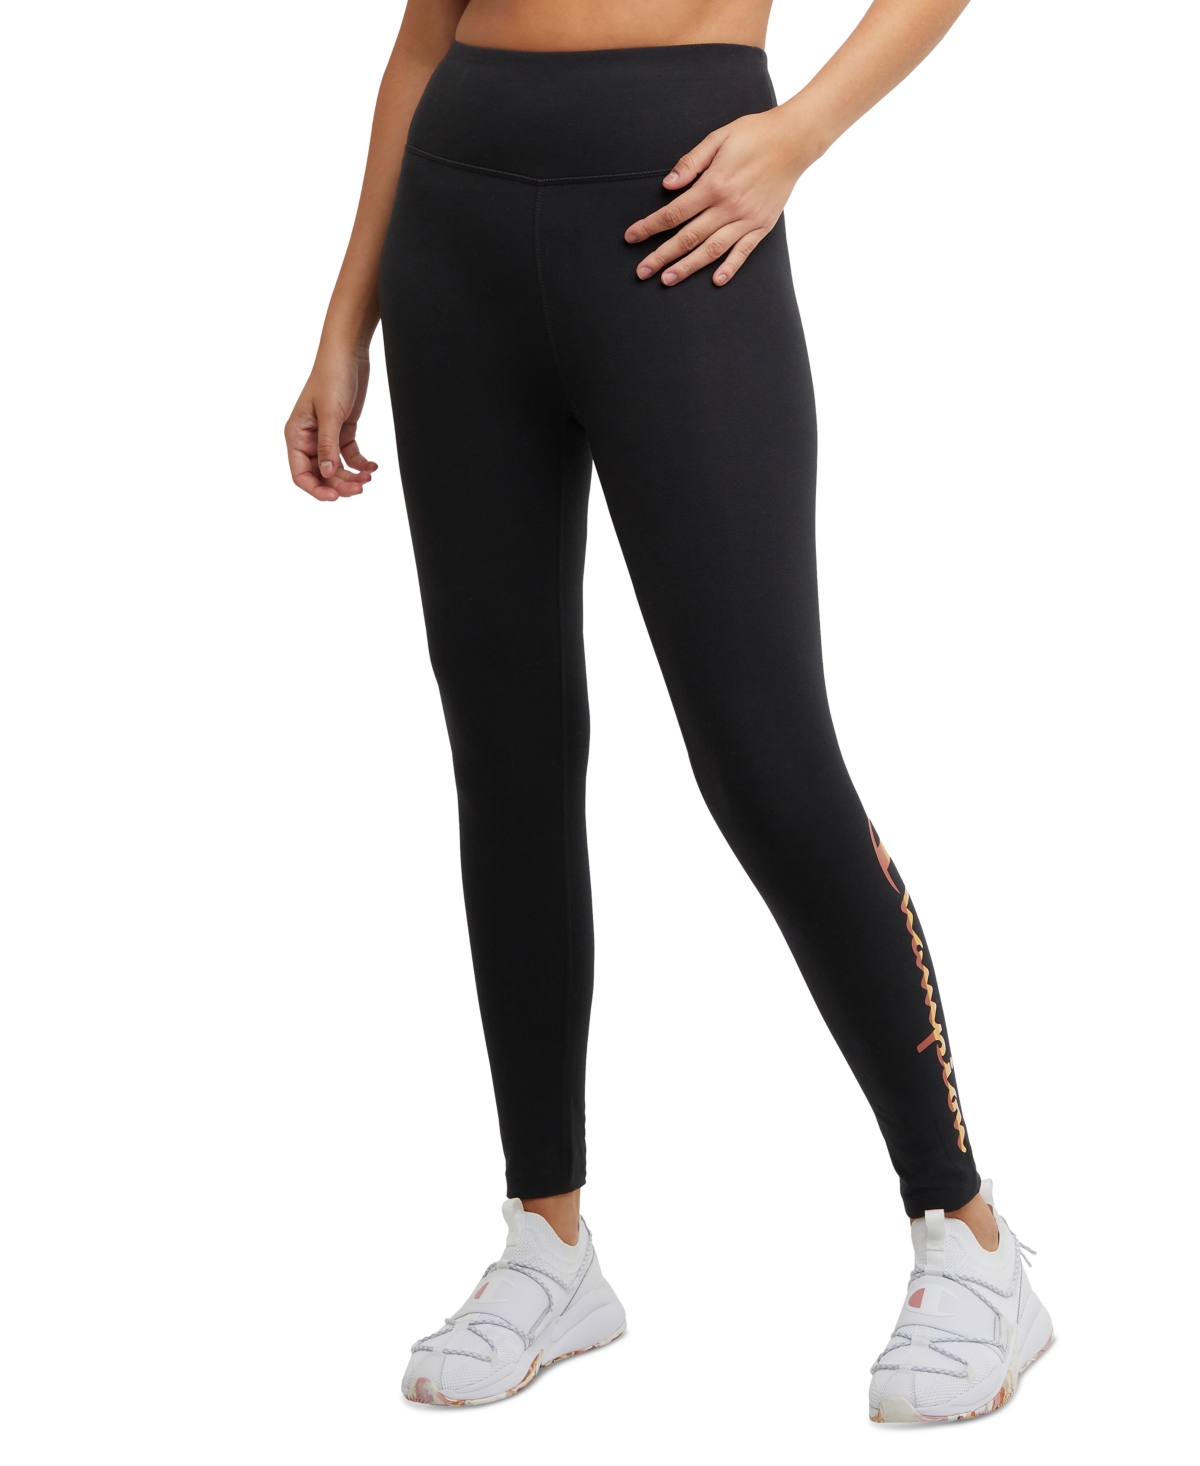 CHAMPION WOMEN'S GRAPHIC AUTHENTIC TIGHTS